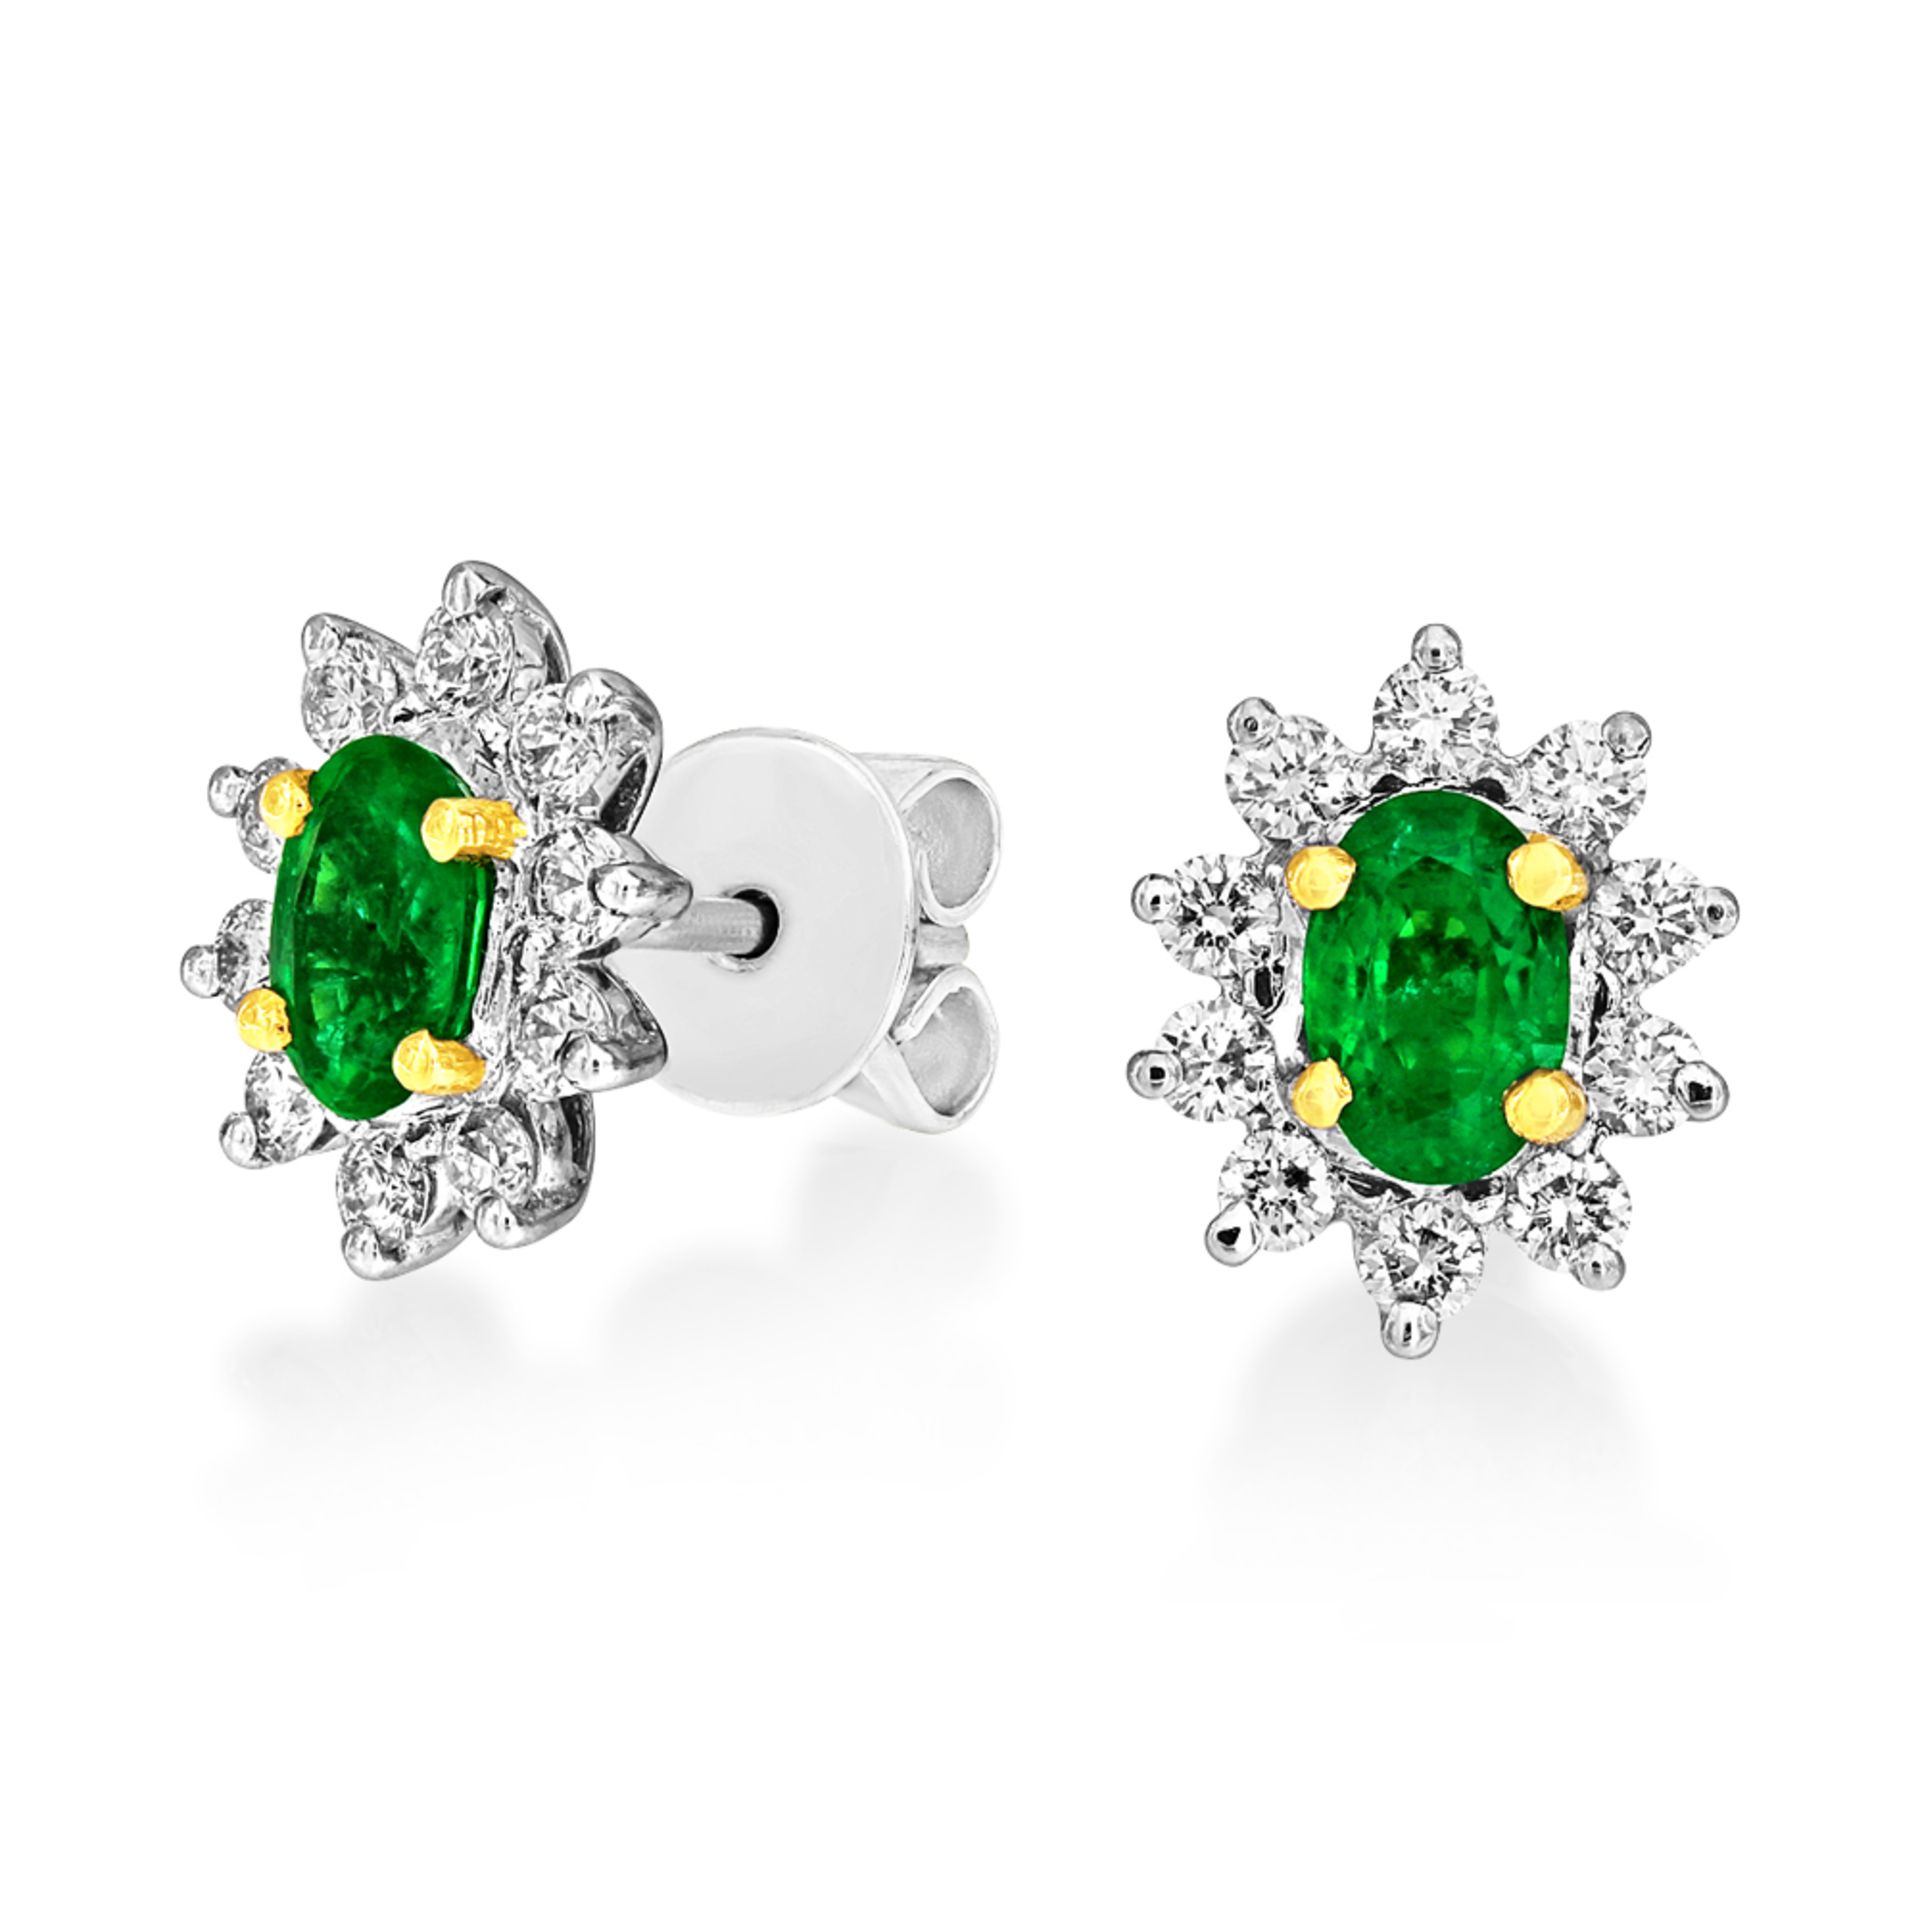 A Pair Of 18ct White And Yellow Gold Emerald and Diamond Earrings